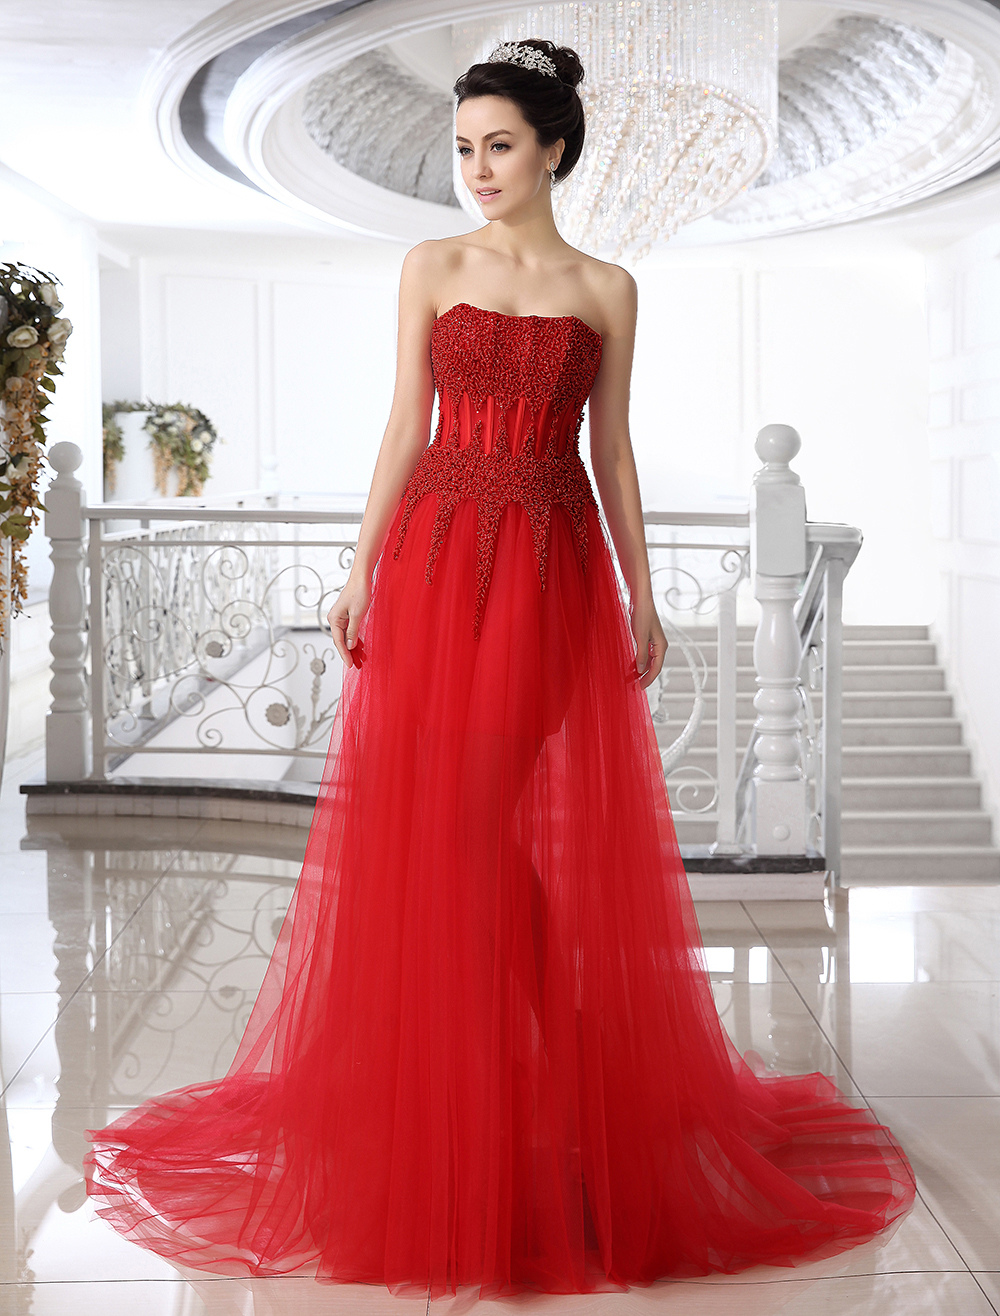 Red Sheath Strapless Beading Court Train Tulle Bridal Wedding Gown (Red Wedding Dress) photo